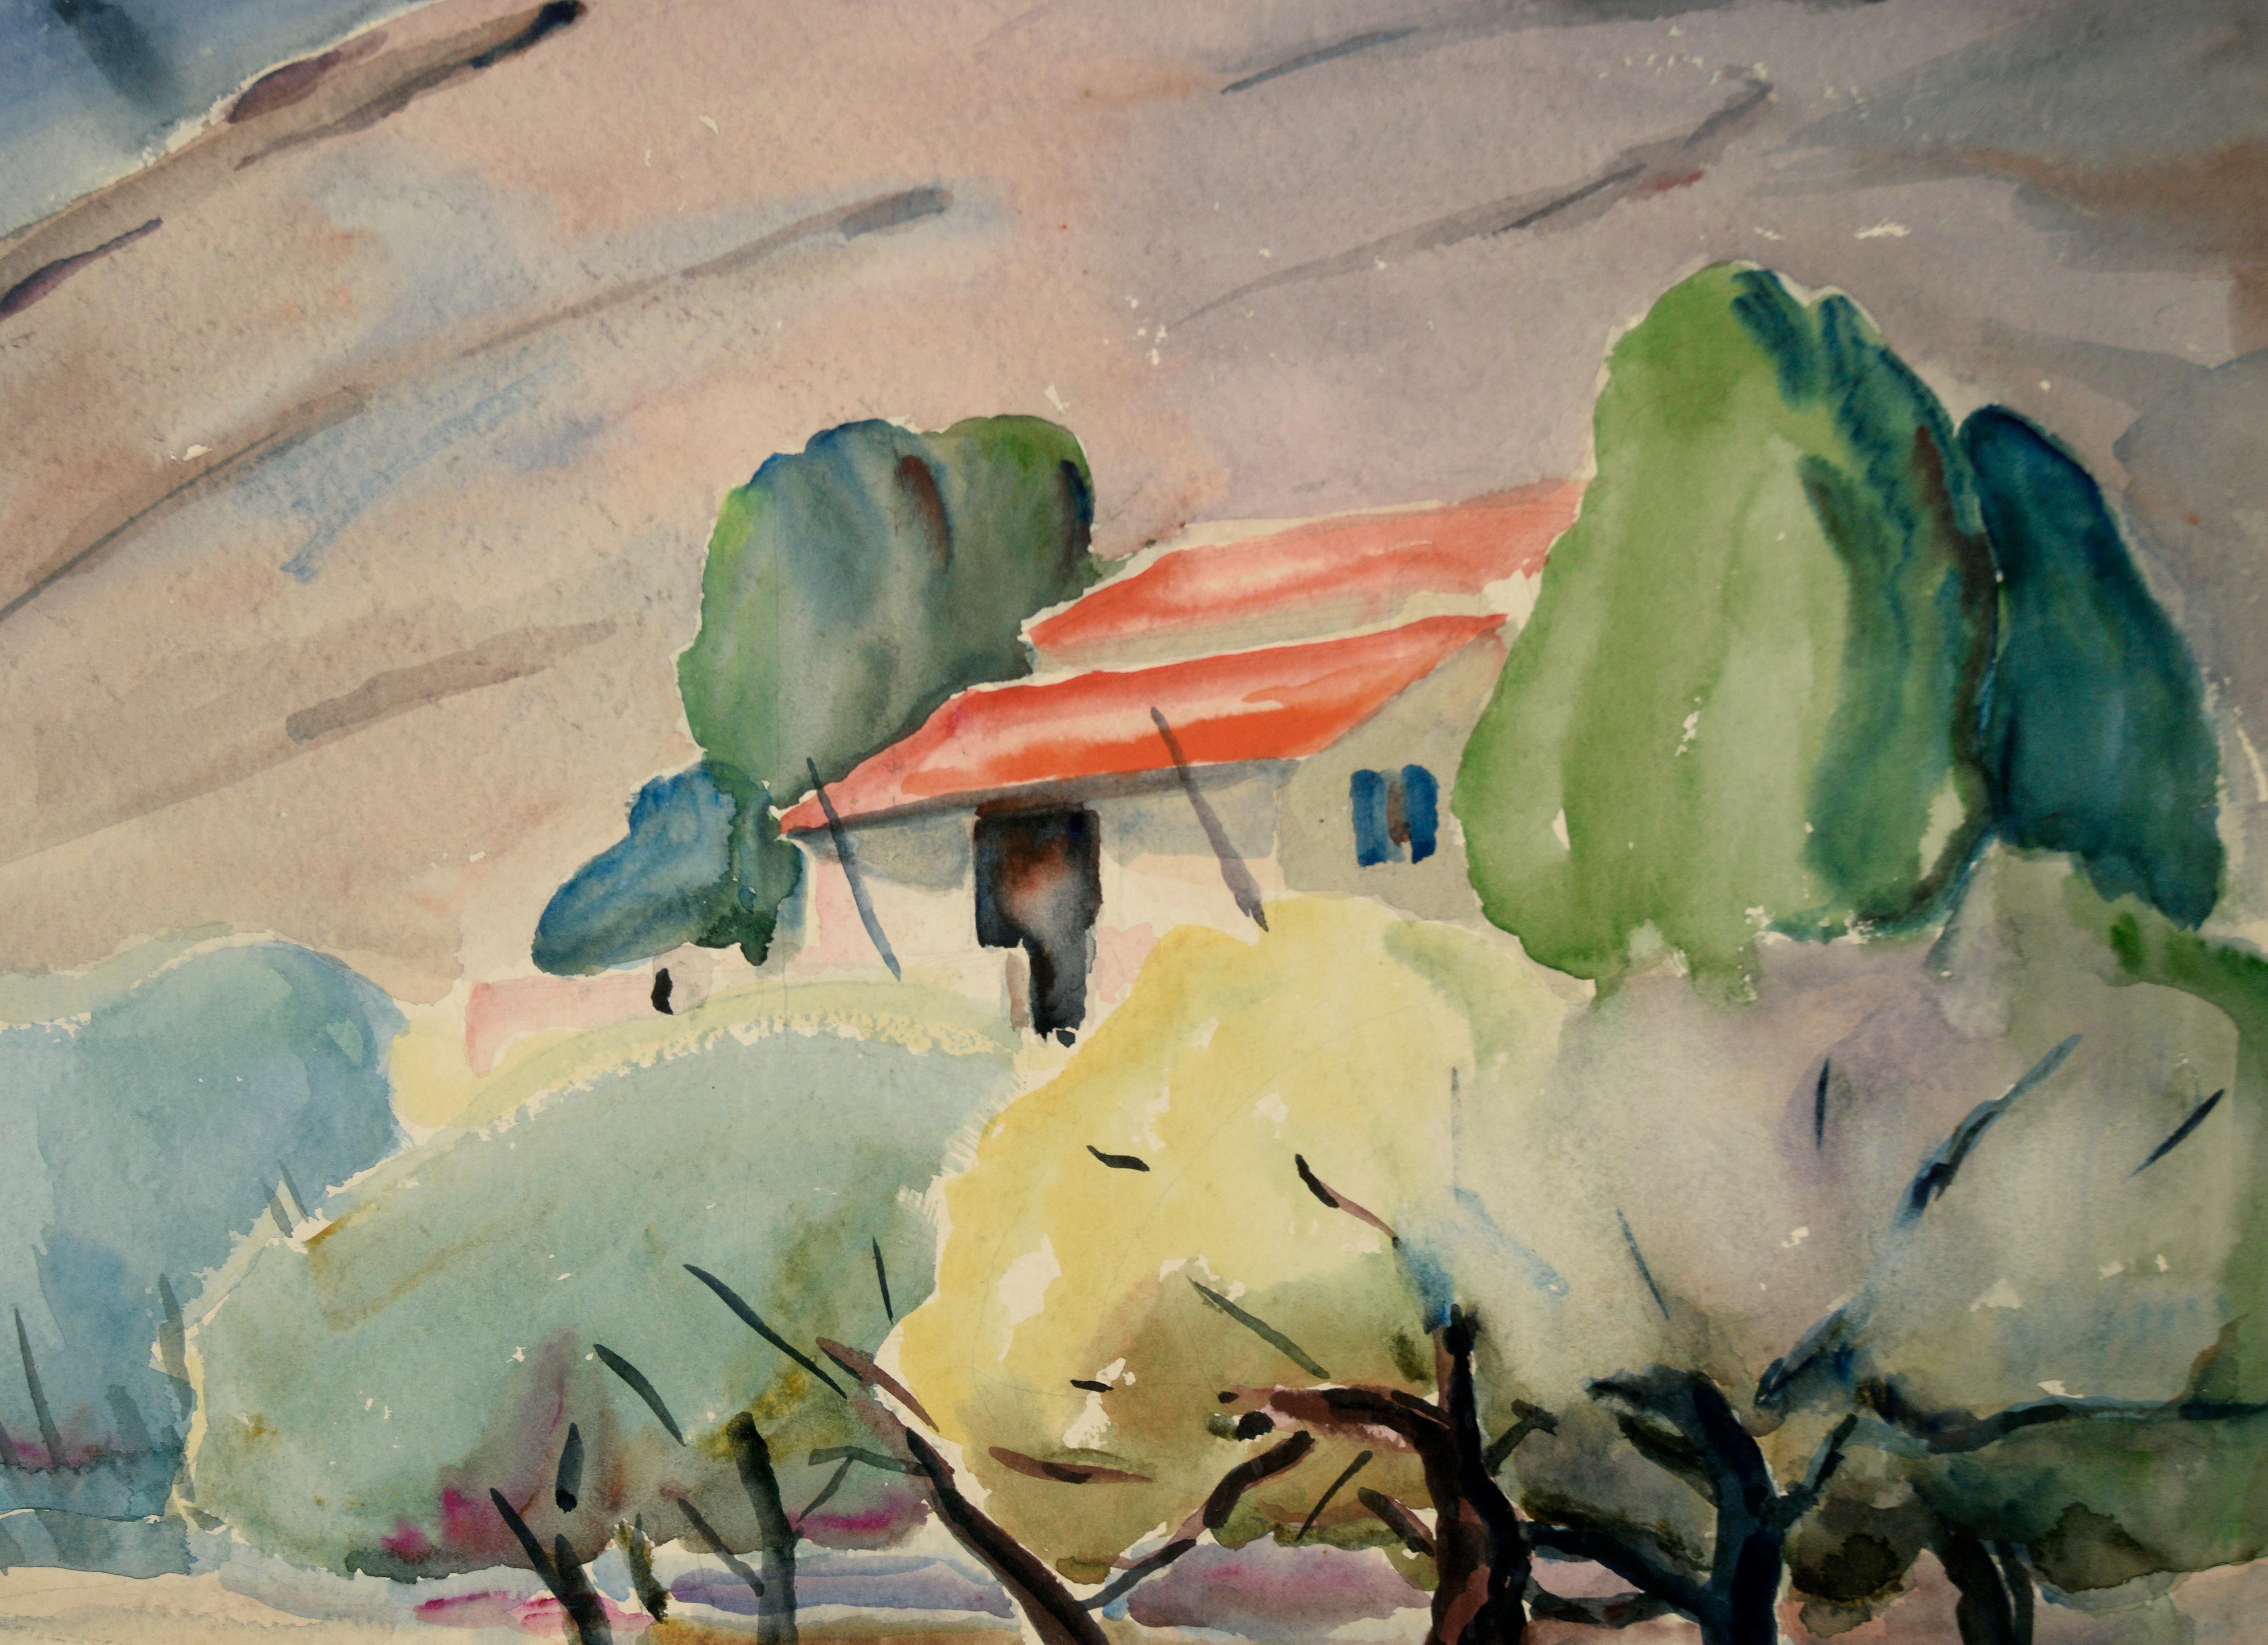 House on the Hillside in the Trees - Watercolor on Paper - American Impressionist Art by Emil Armin